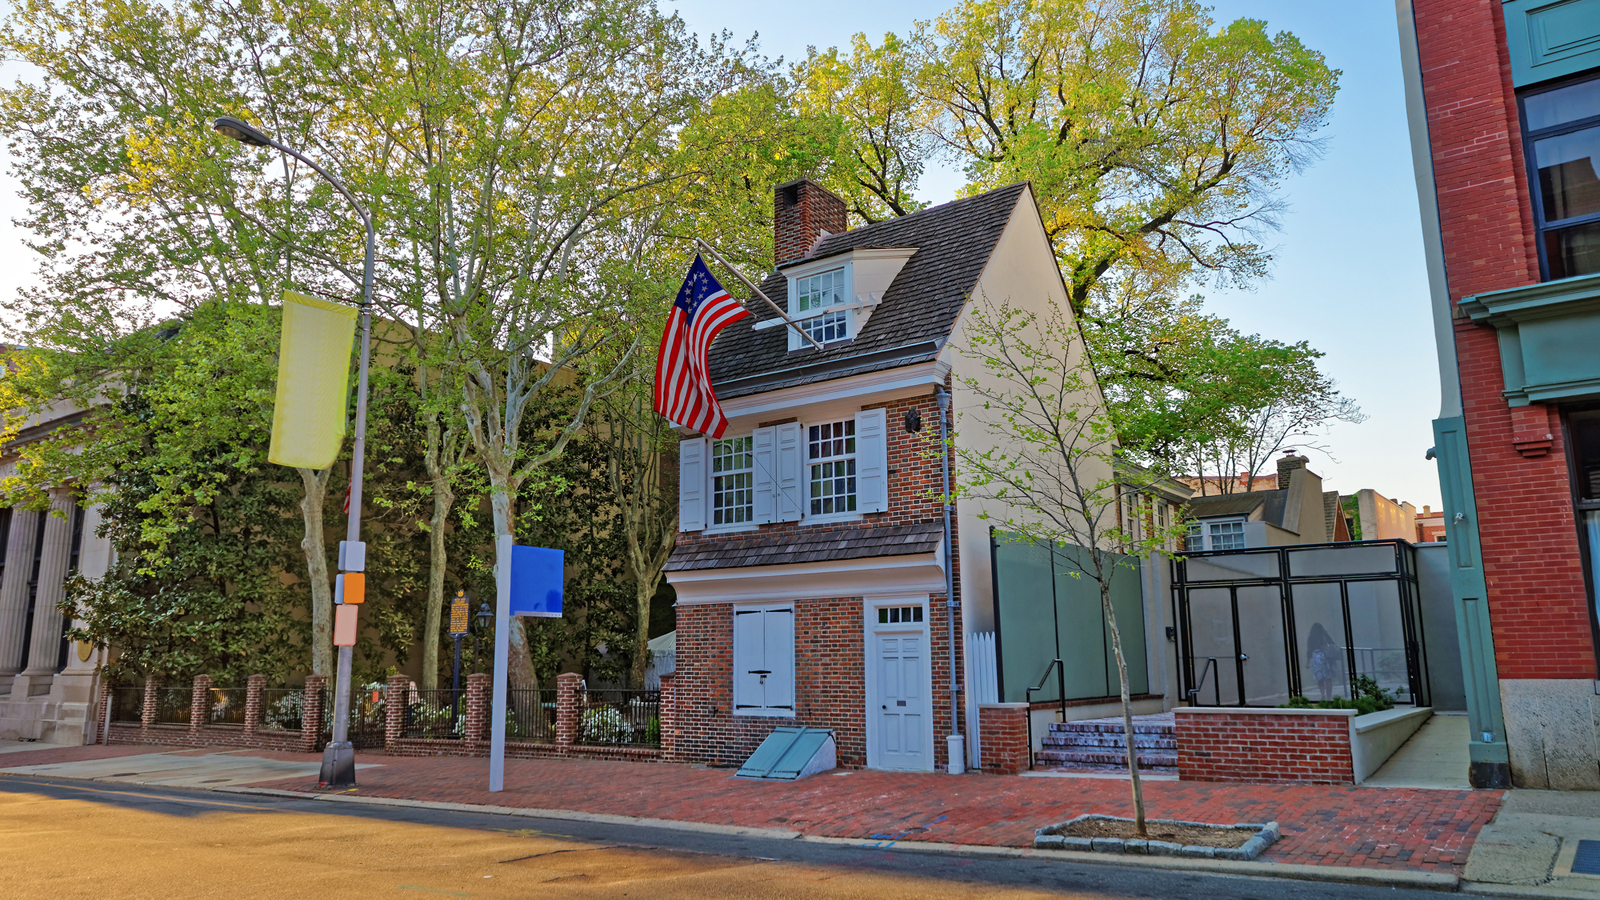 Betsy Ross House In Philadelphia And The Flag Of The United States